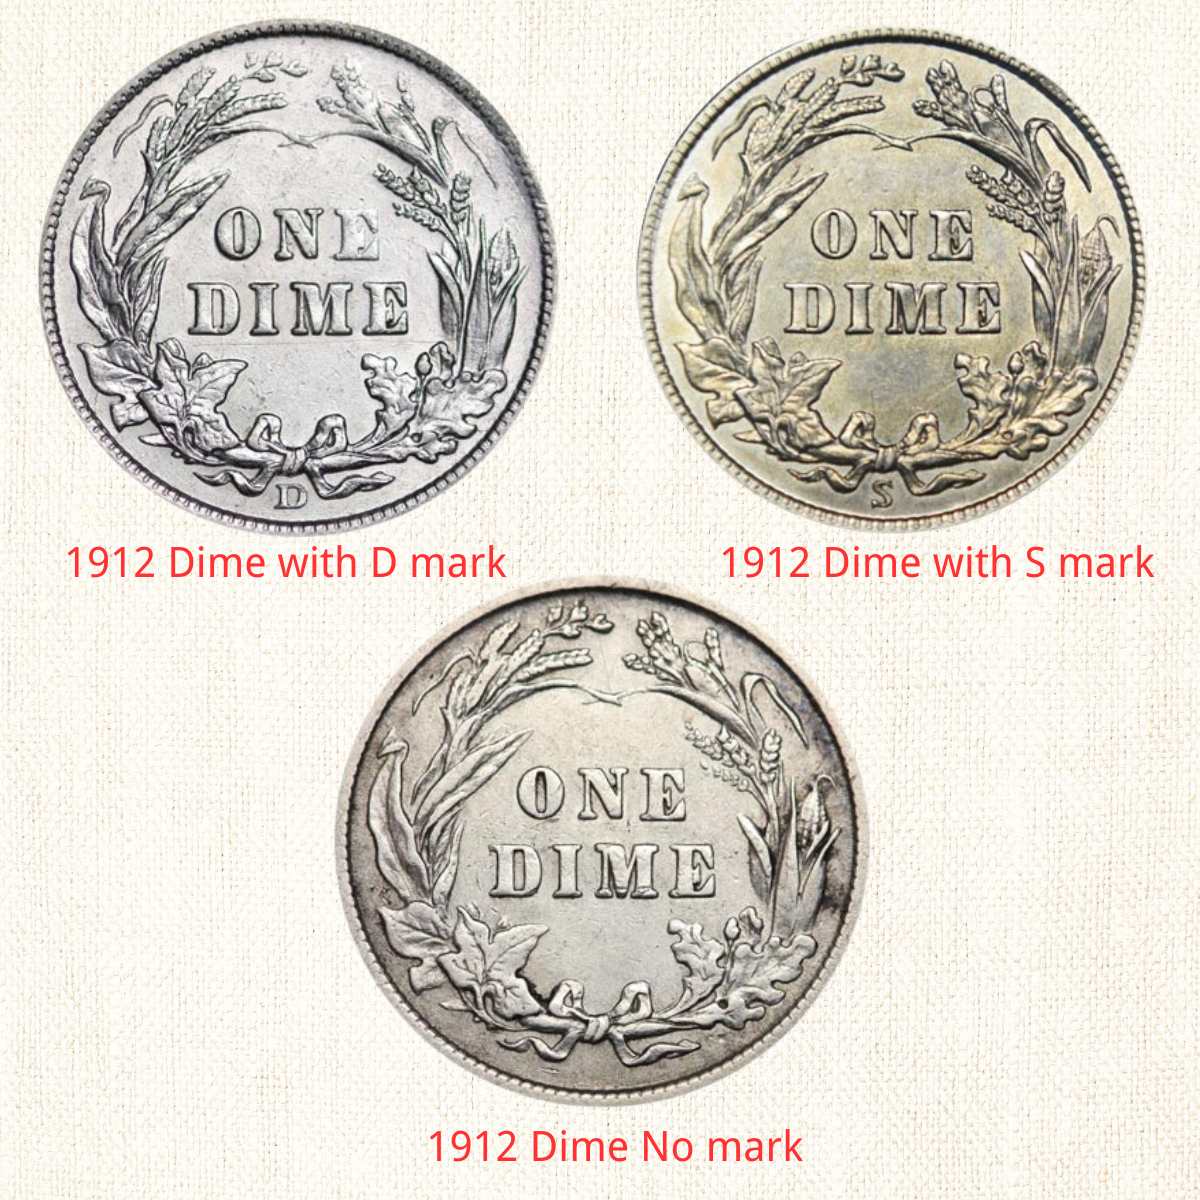 1912 dime with marks